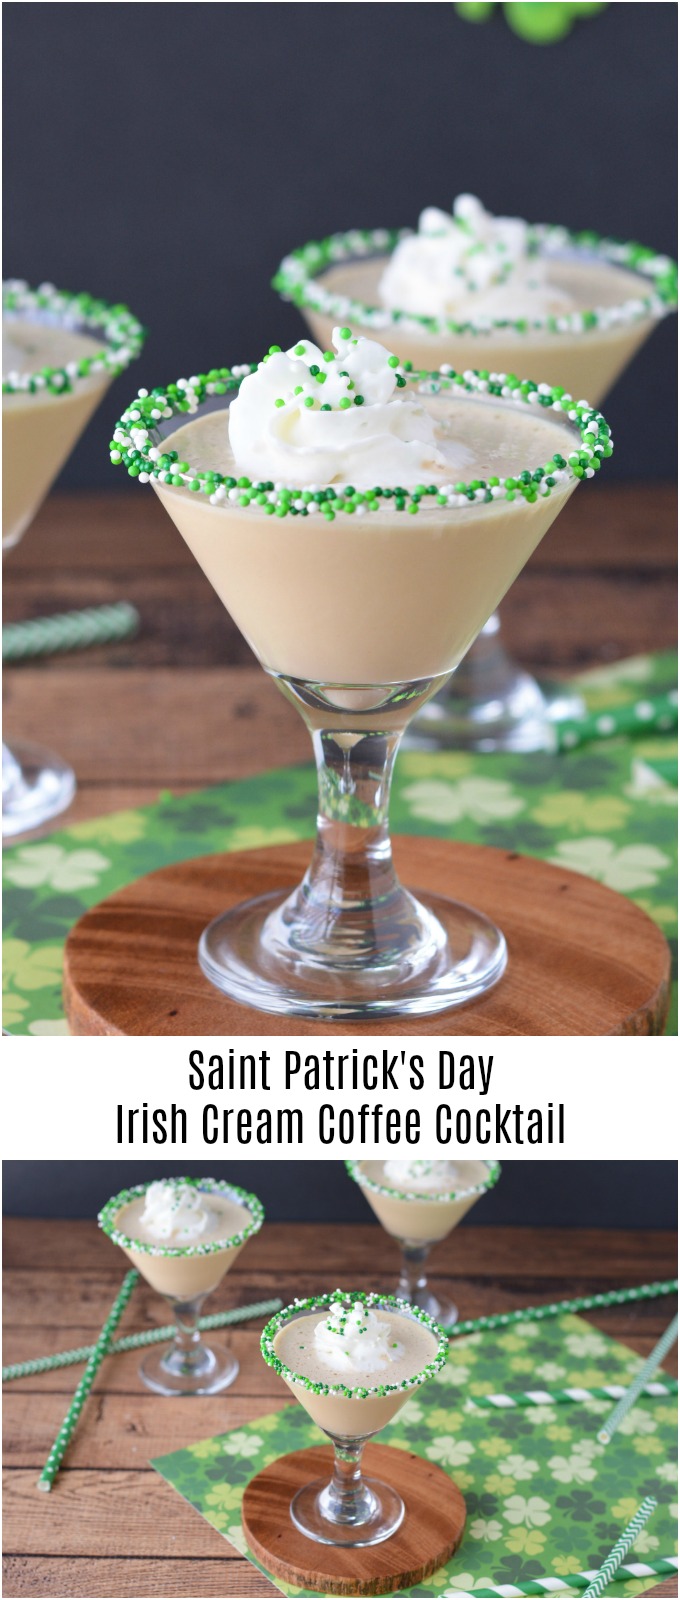 Irish Cream Coffee Cocktail Recipe | Green St Patrick’s Day Drink Recipes You Must Try